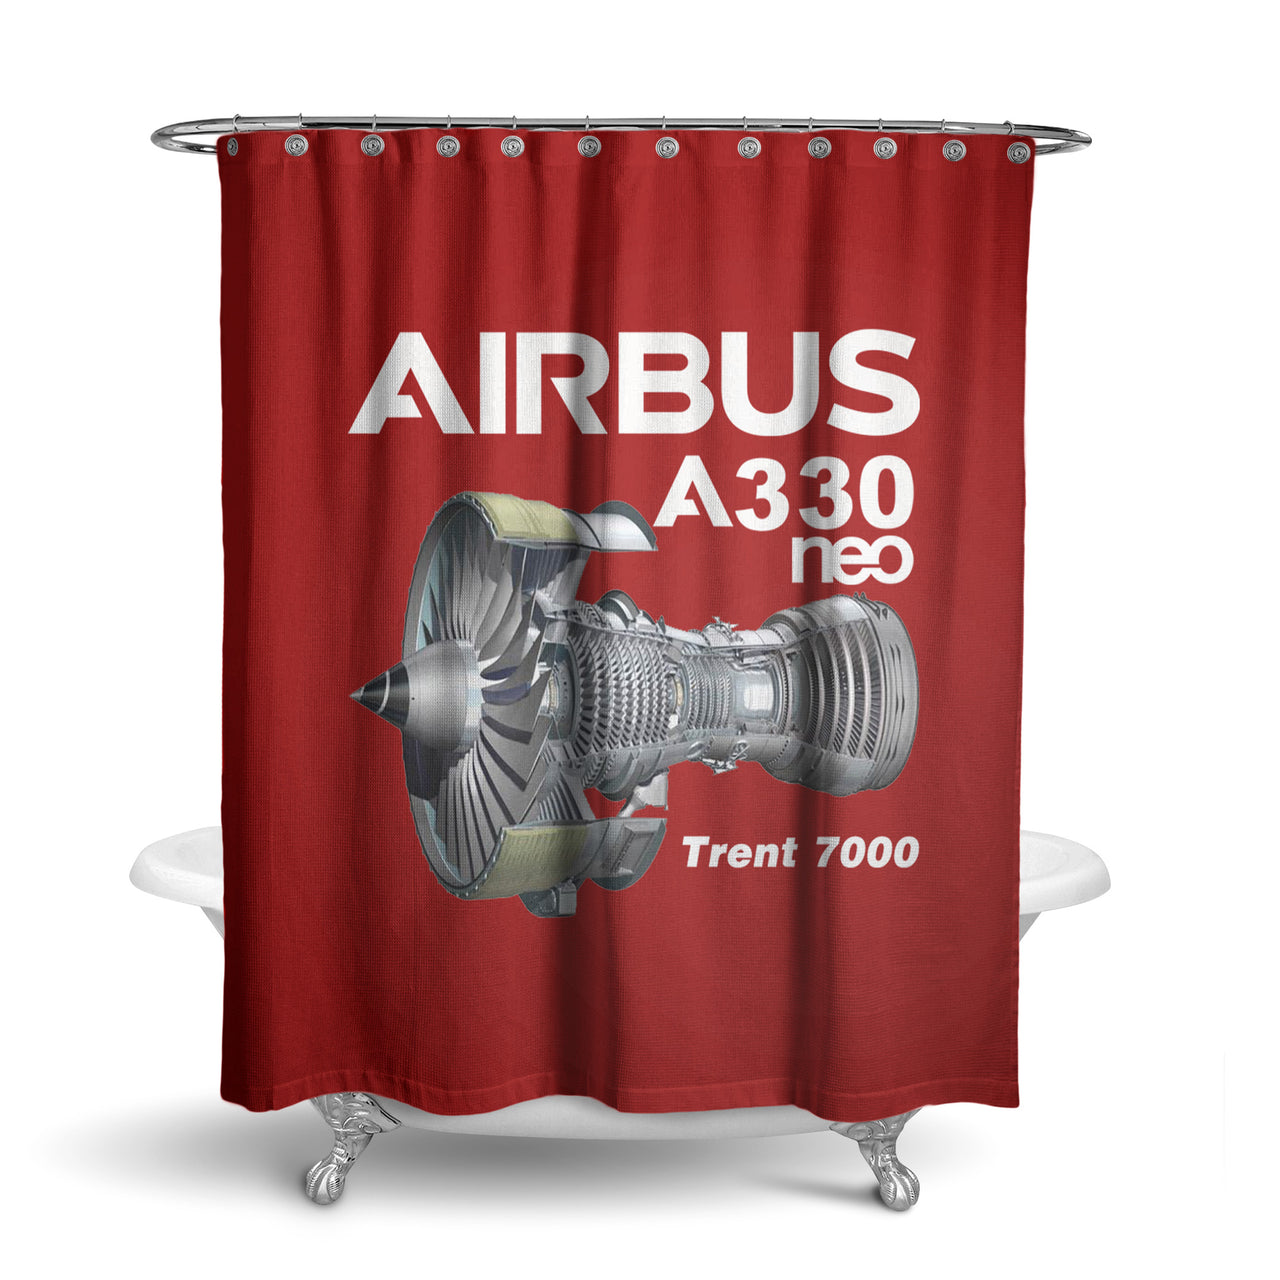 Airbus A330neo & Trent 7000 Designed Shower Curtains